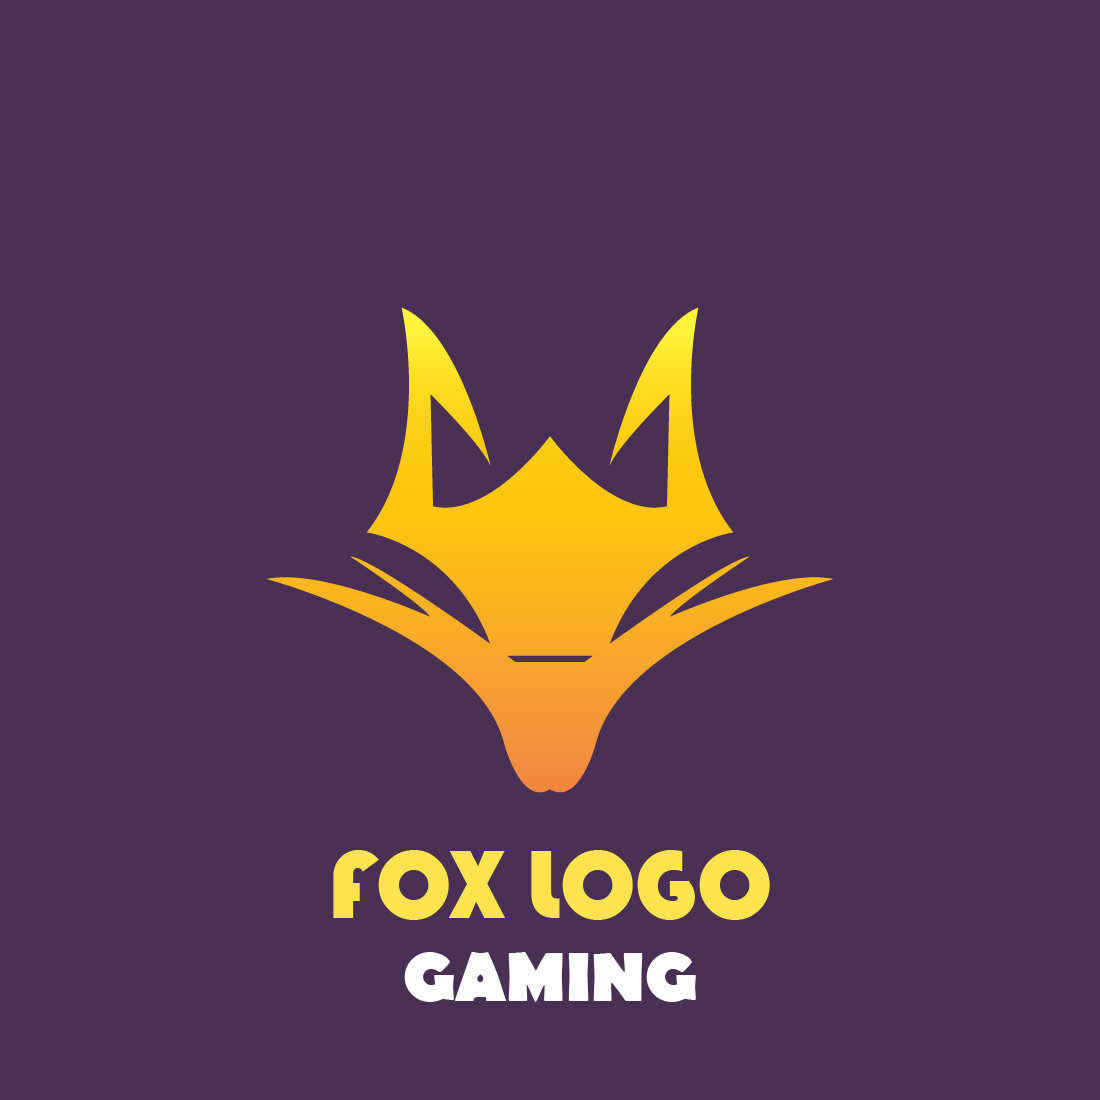 Logo for a gaming company.